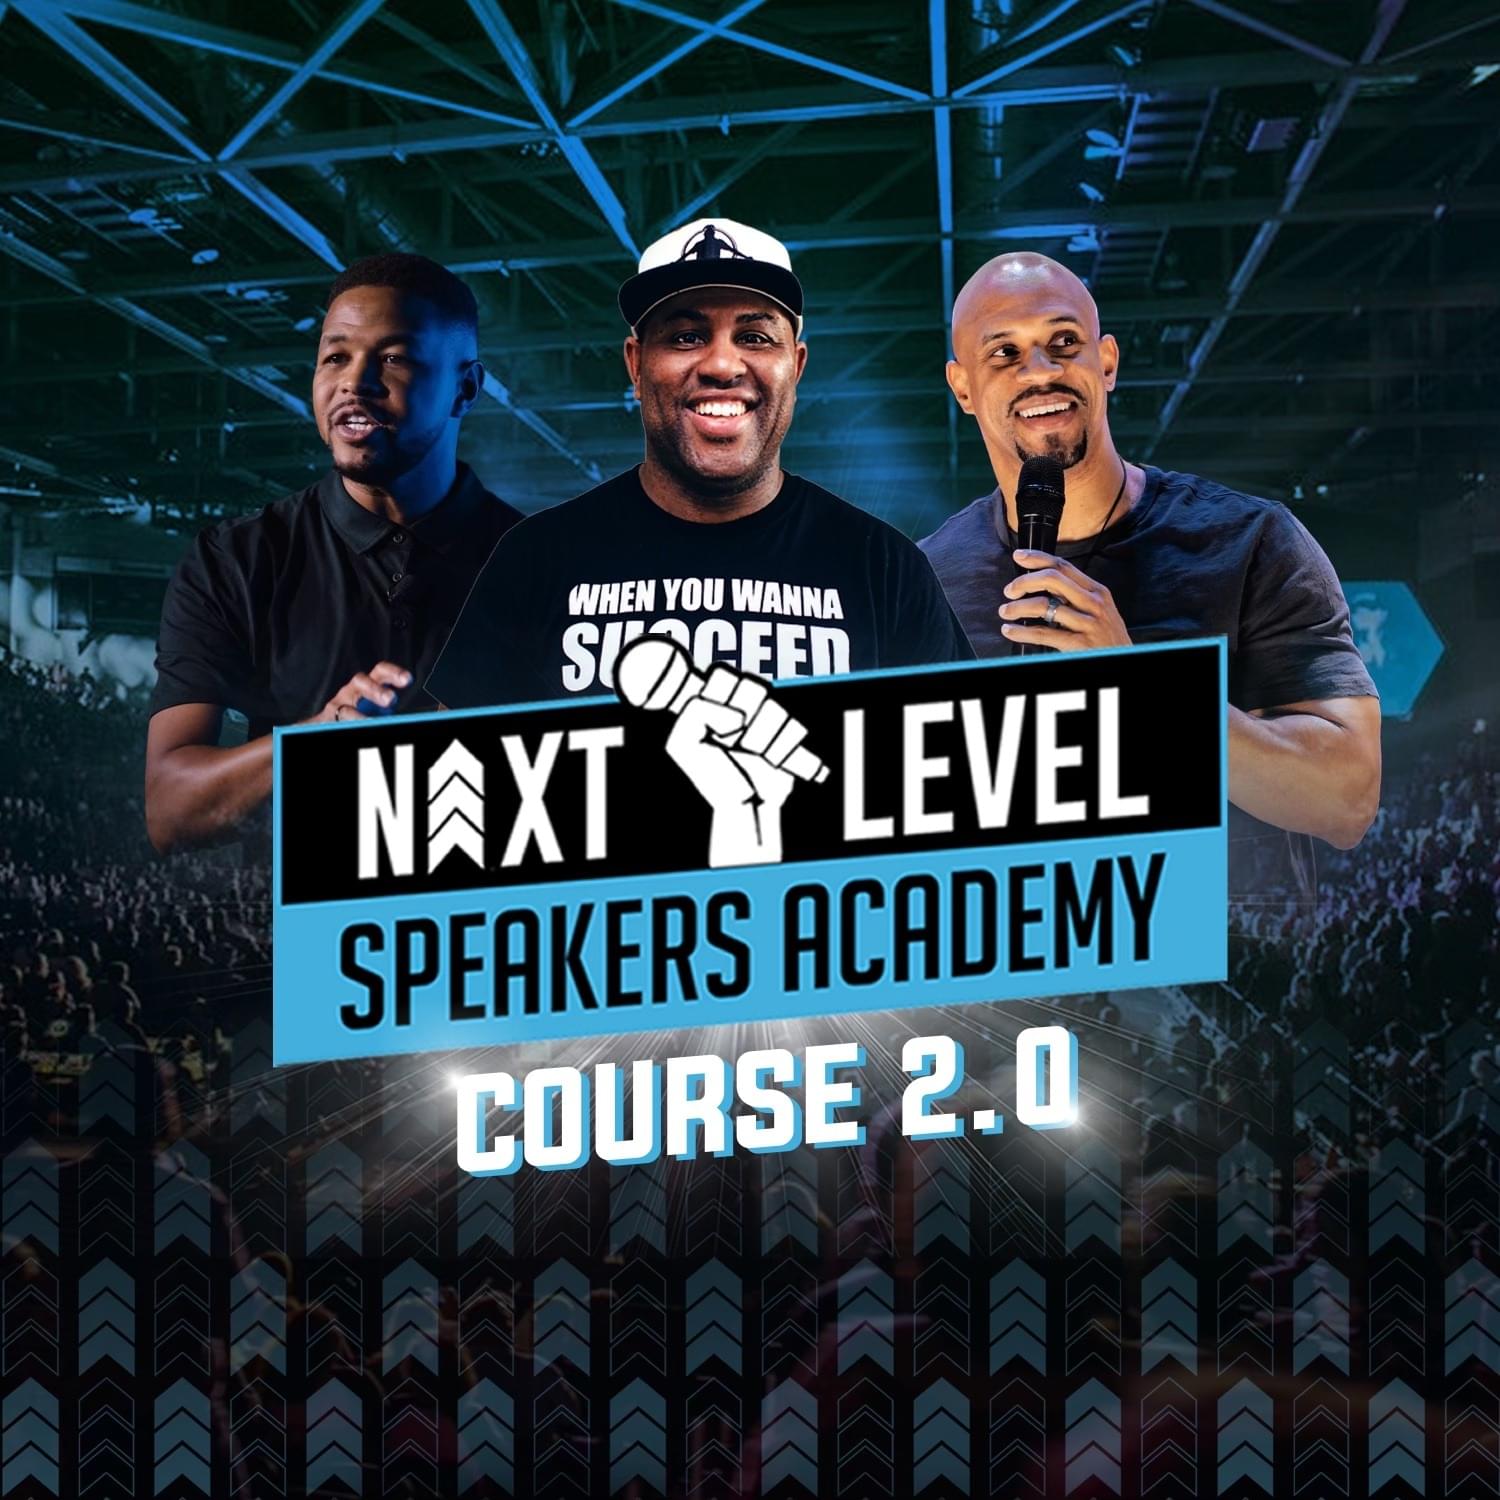 komedie maagd atmosfeer The Next Level Speakers Academy w/Eric Thomas, Jeremy Anderson, and Inky  Johnson